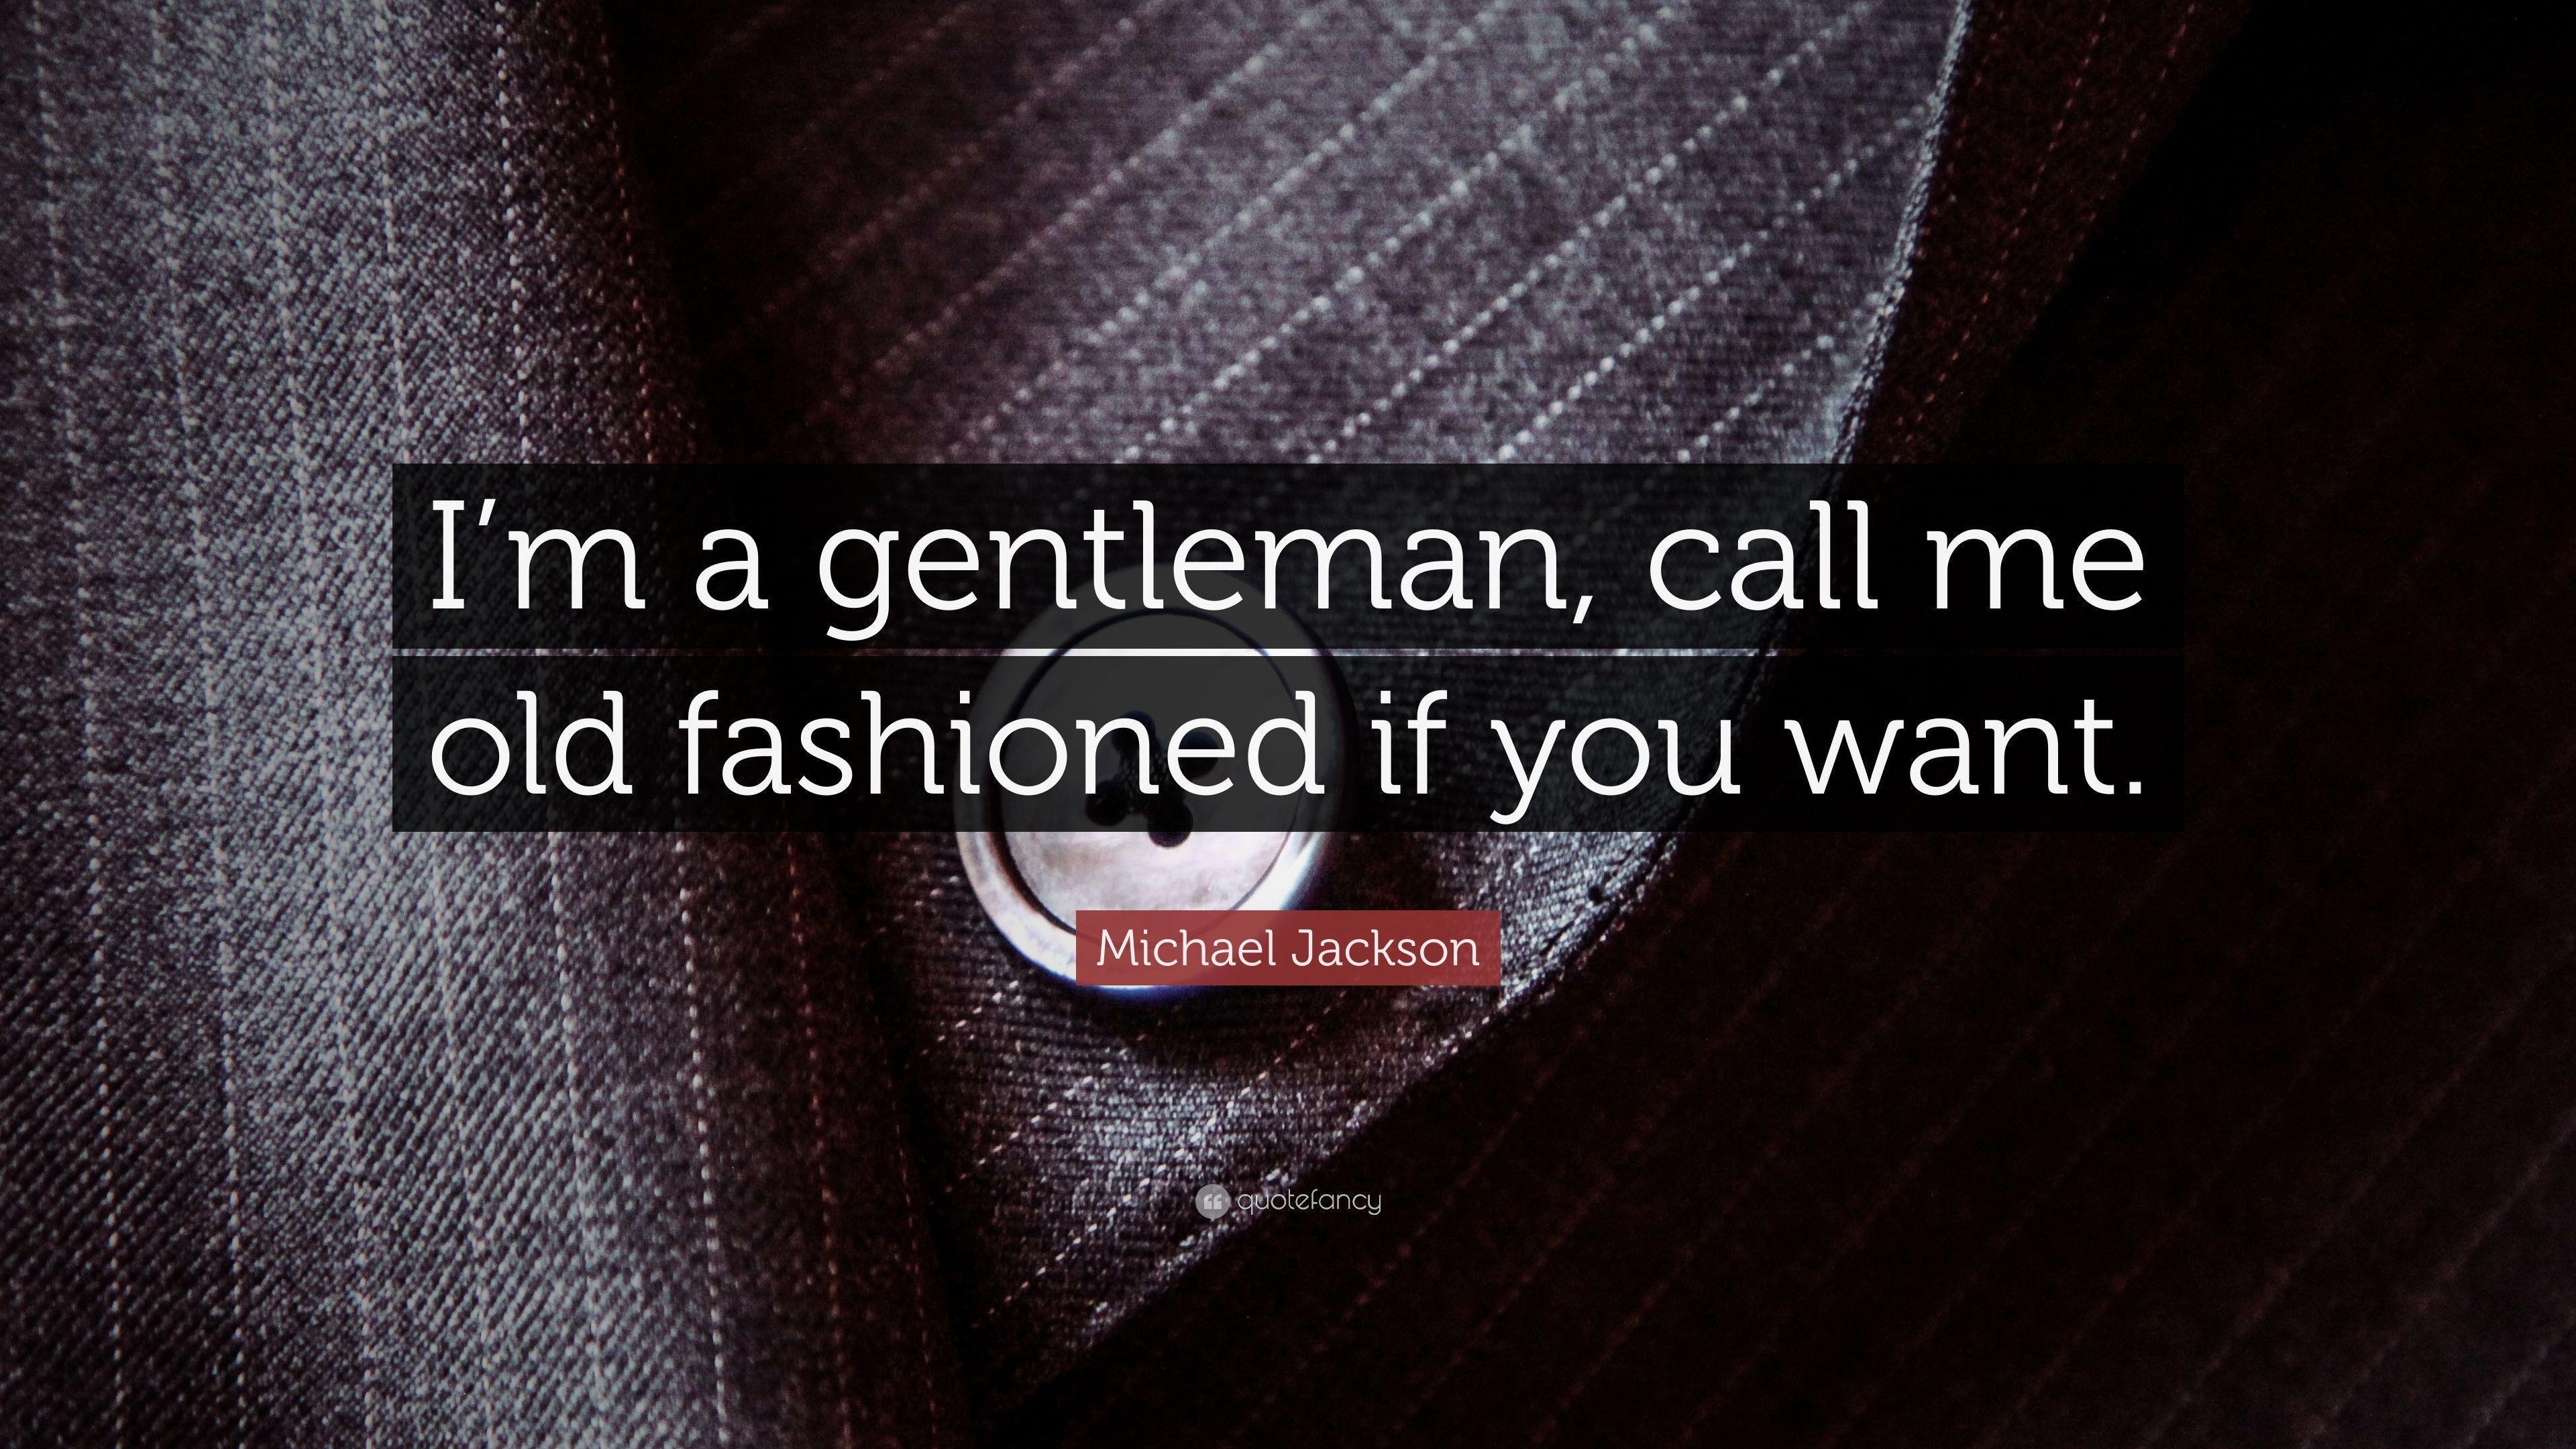 Michael Jackson Quote: “I'm a gentleman, call me old fashioned if